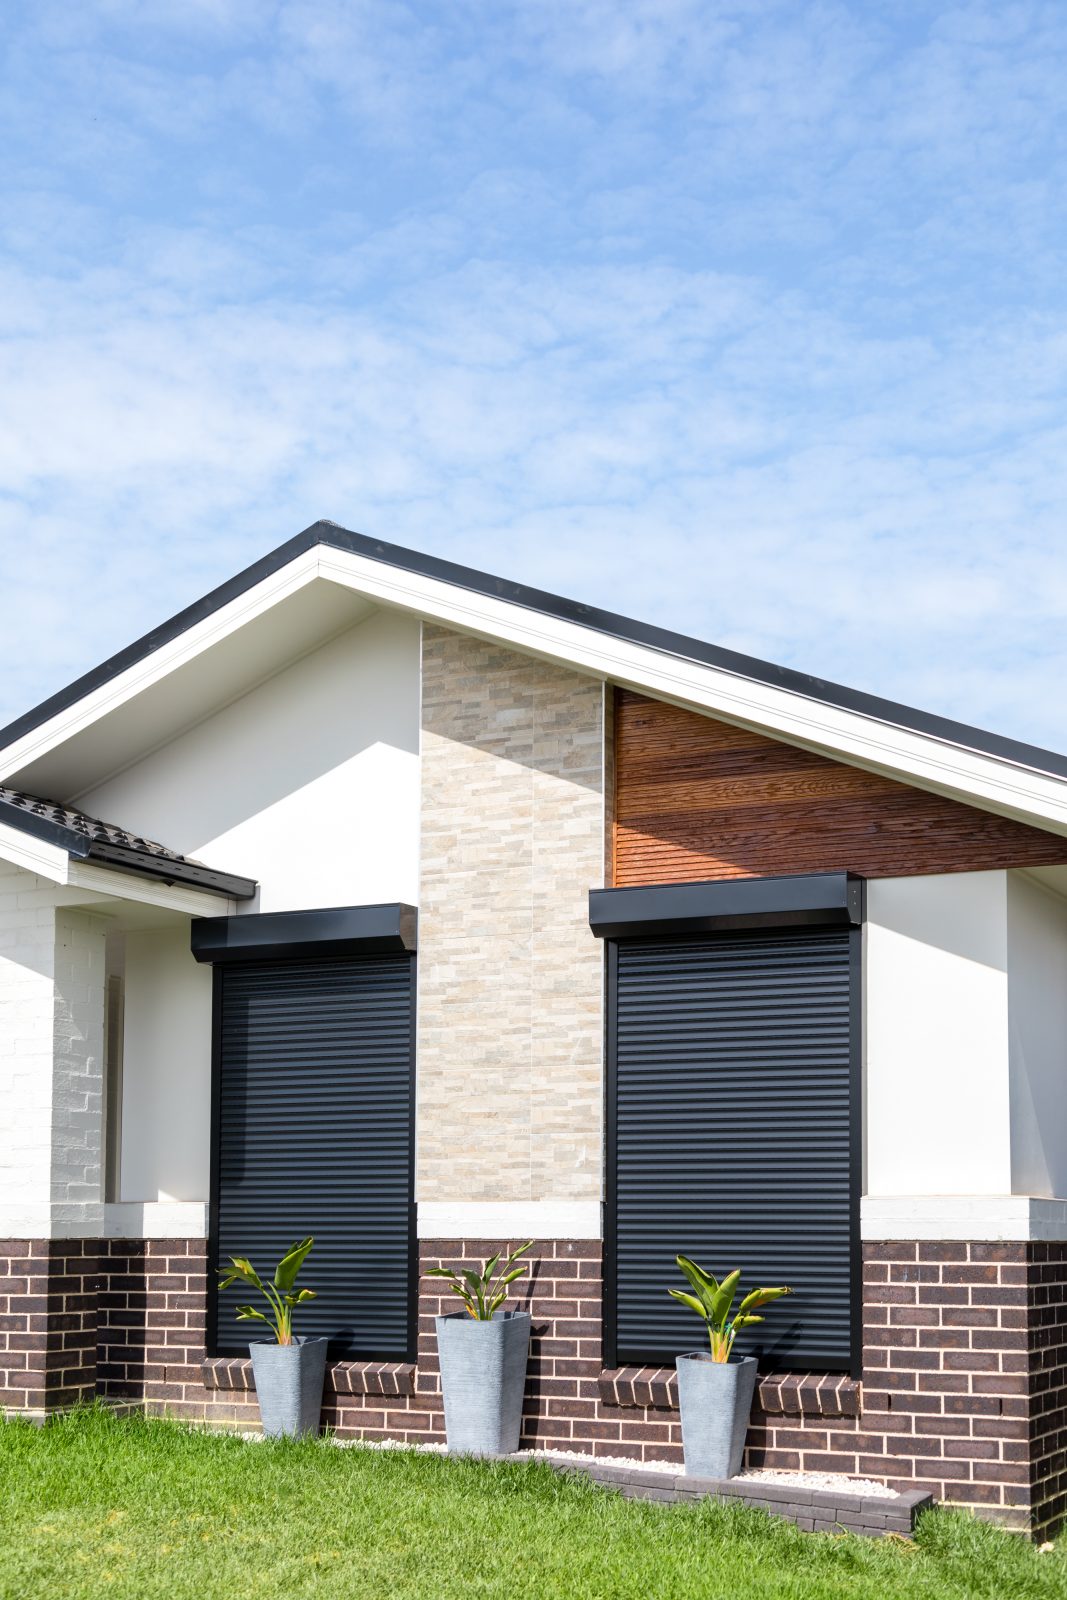 Increase Your Home’s Value with Roller Shutters